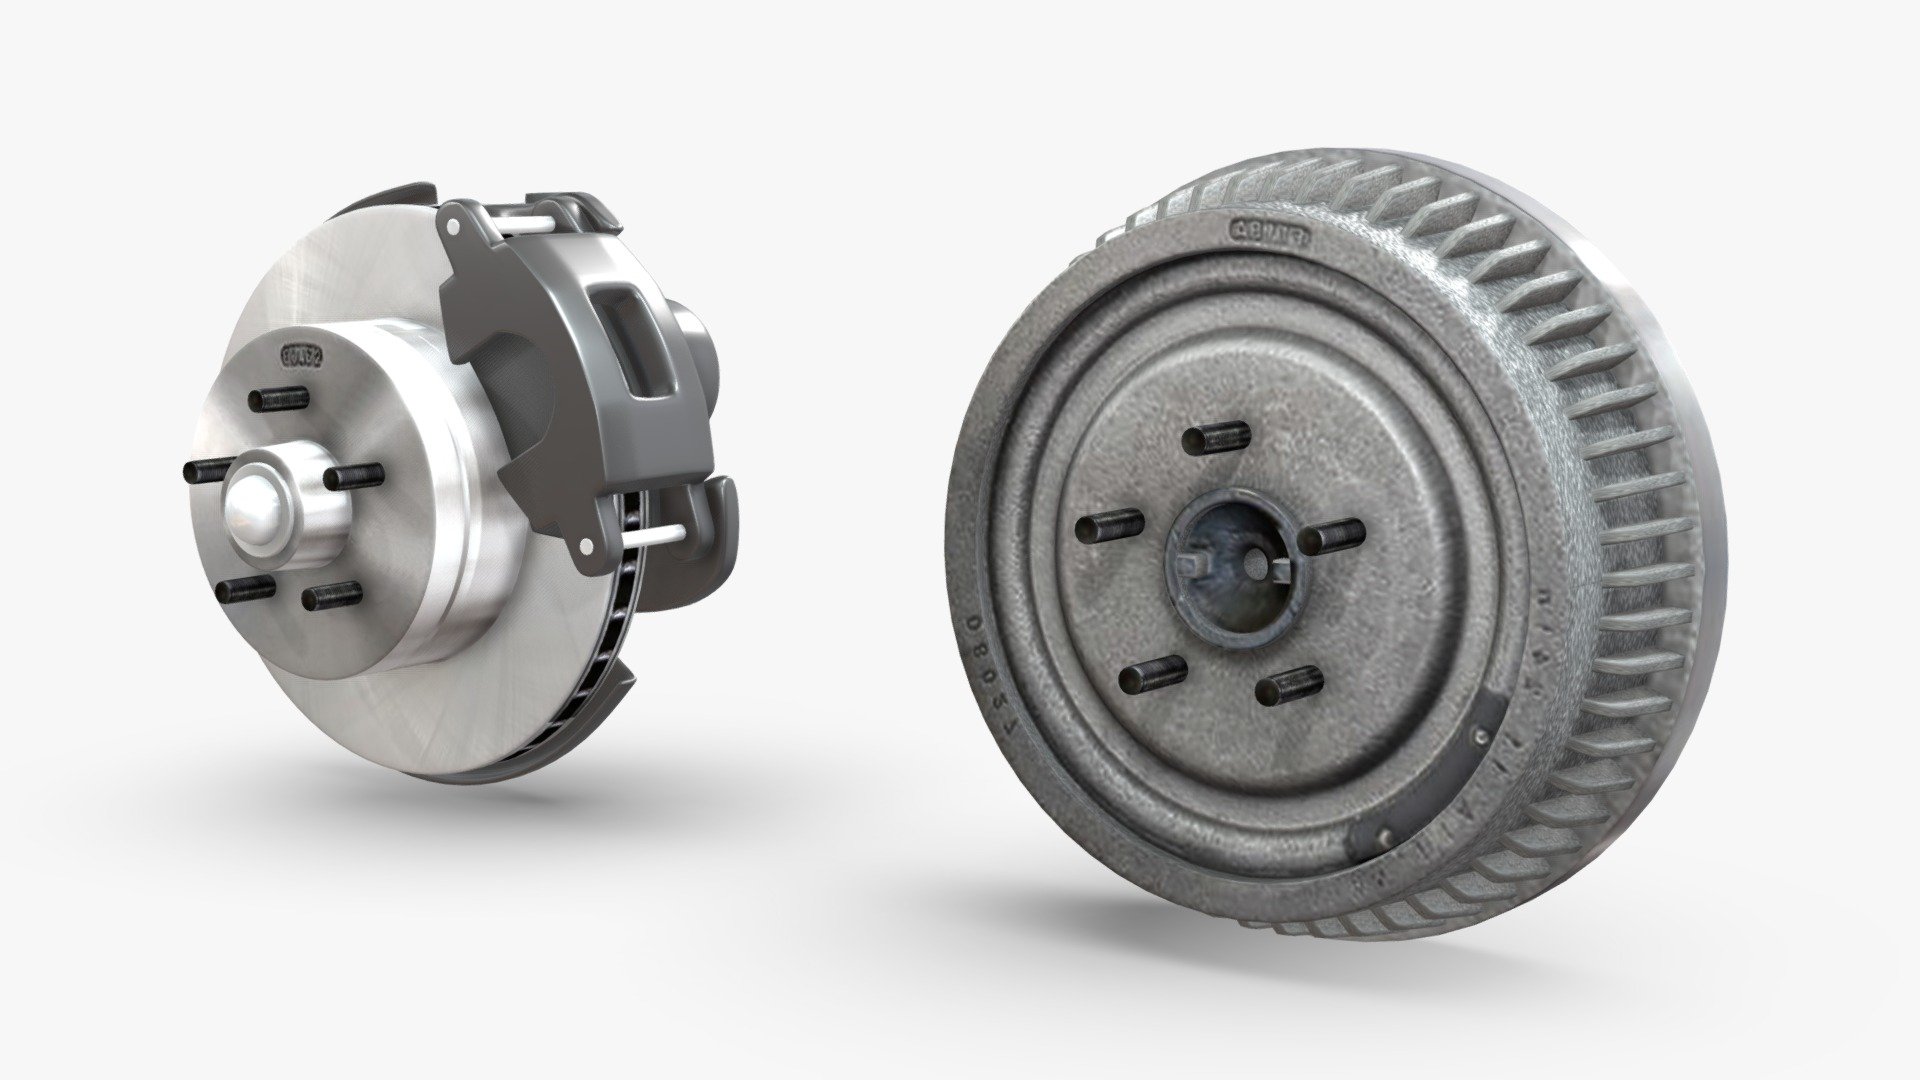 NNAVAS 3D store.

3D model of a car/truck disc and drum brake.

The brakes exterior is great for close range renders.

The model was created with 3DS Max 2016 using the open subdivision modifier which has been left in the stack to adjust the level of detail.

FBX, OBJ and 3DS files have been included in separated HI and LO subdivision versions.

The model has 4.850 polygons with subdivision level at 0 and 19.288 at level 1.

Renderer: V Ray.

MATERIALS AND TEXTURES:

All materials and textures are included and mapped in all files, settings might have to be adjusted depending on the software you are using. 

Textures are in PNG format with 1024x1024 resolution 3d model